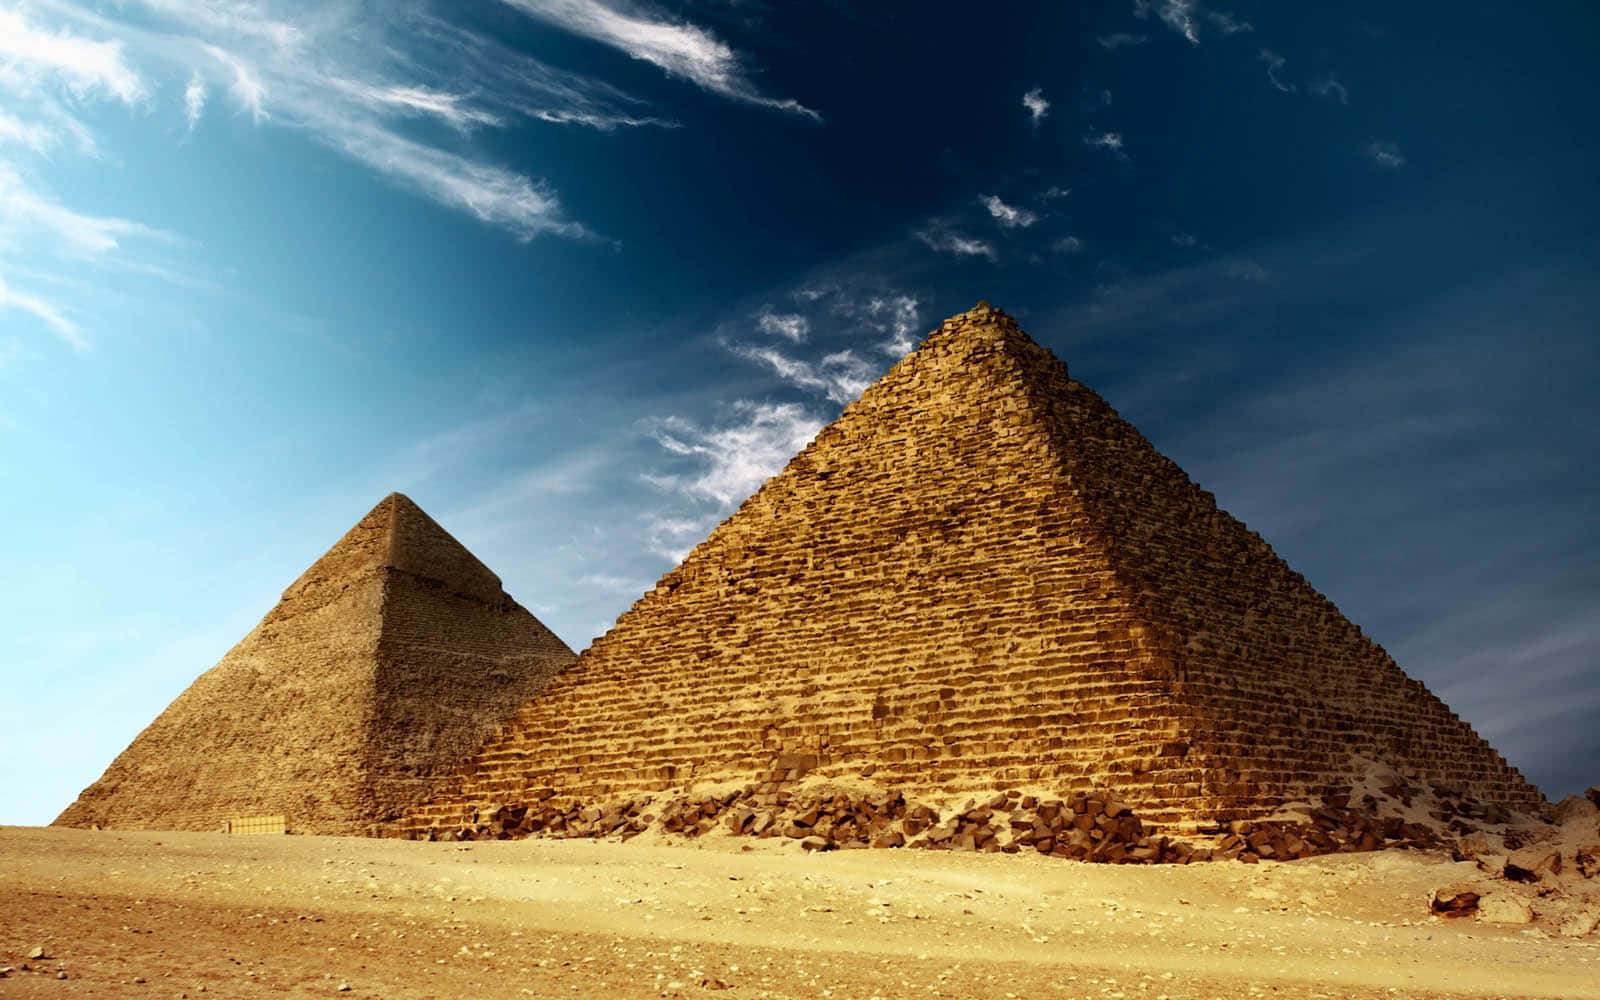 "The Ancient Wonders of Giza"